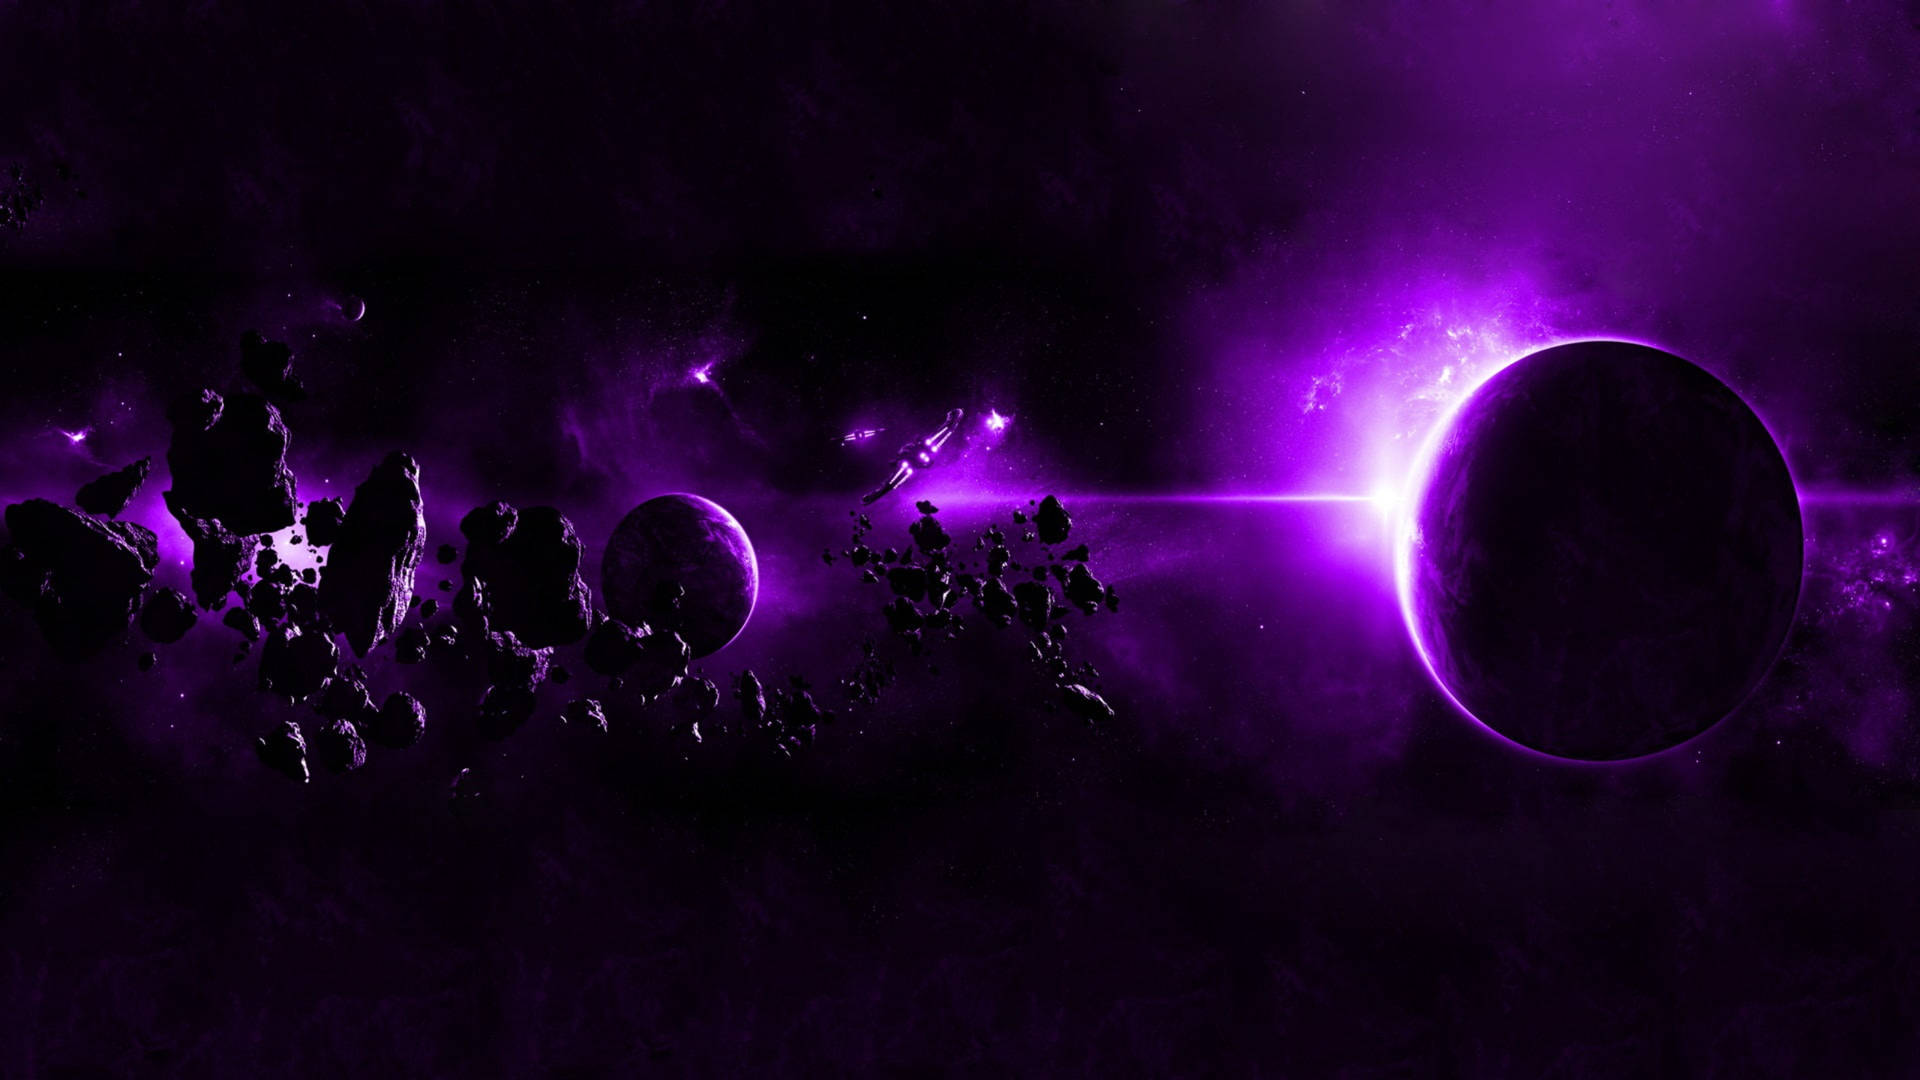 Dynamic Purple Space Planets Background